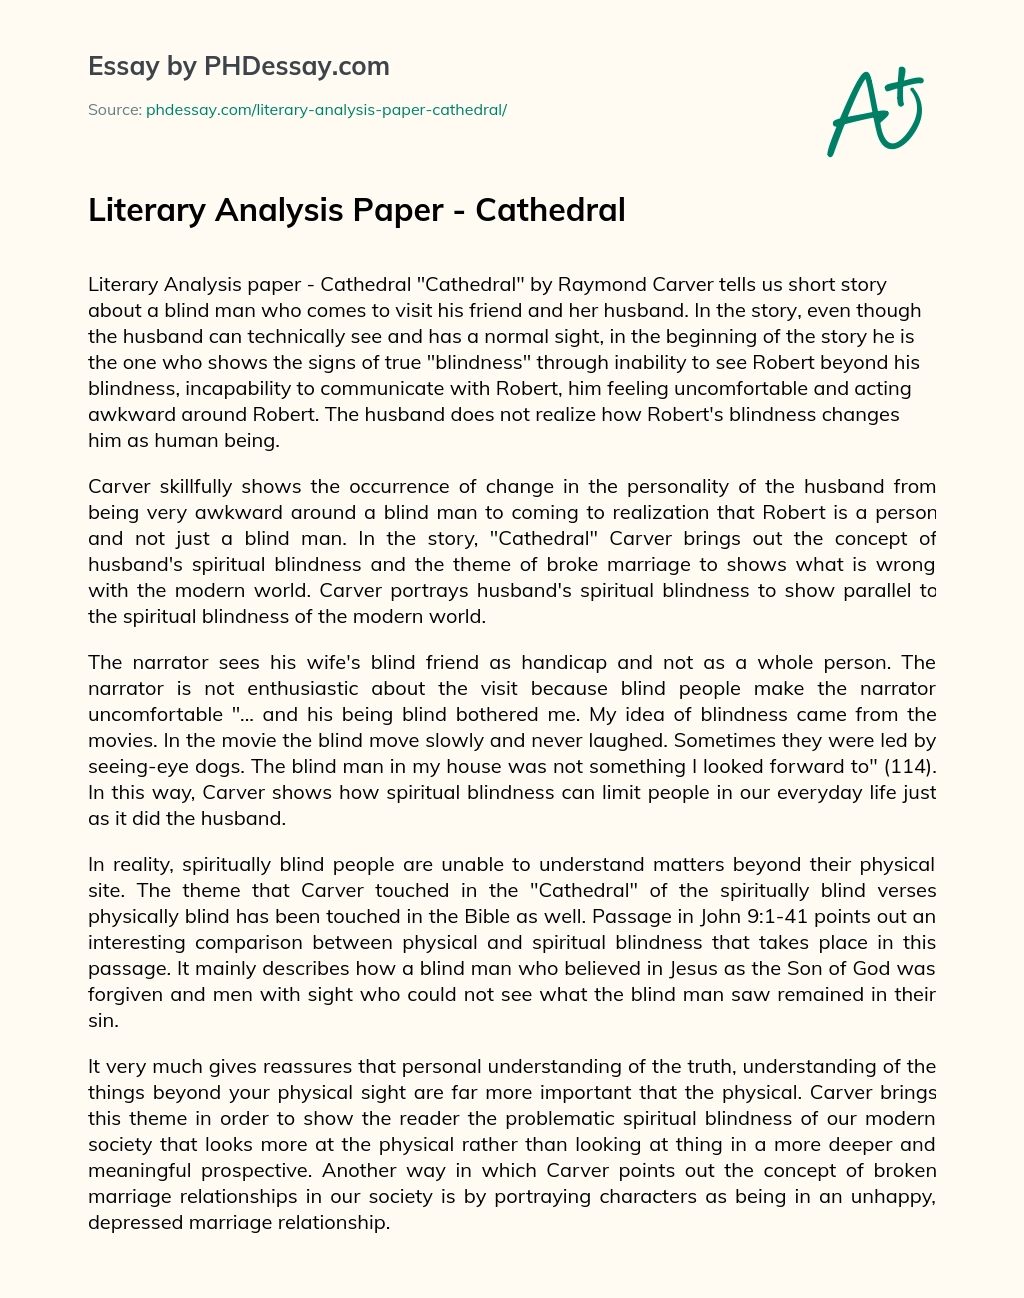 literary analysis on cathedral by raymond carver